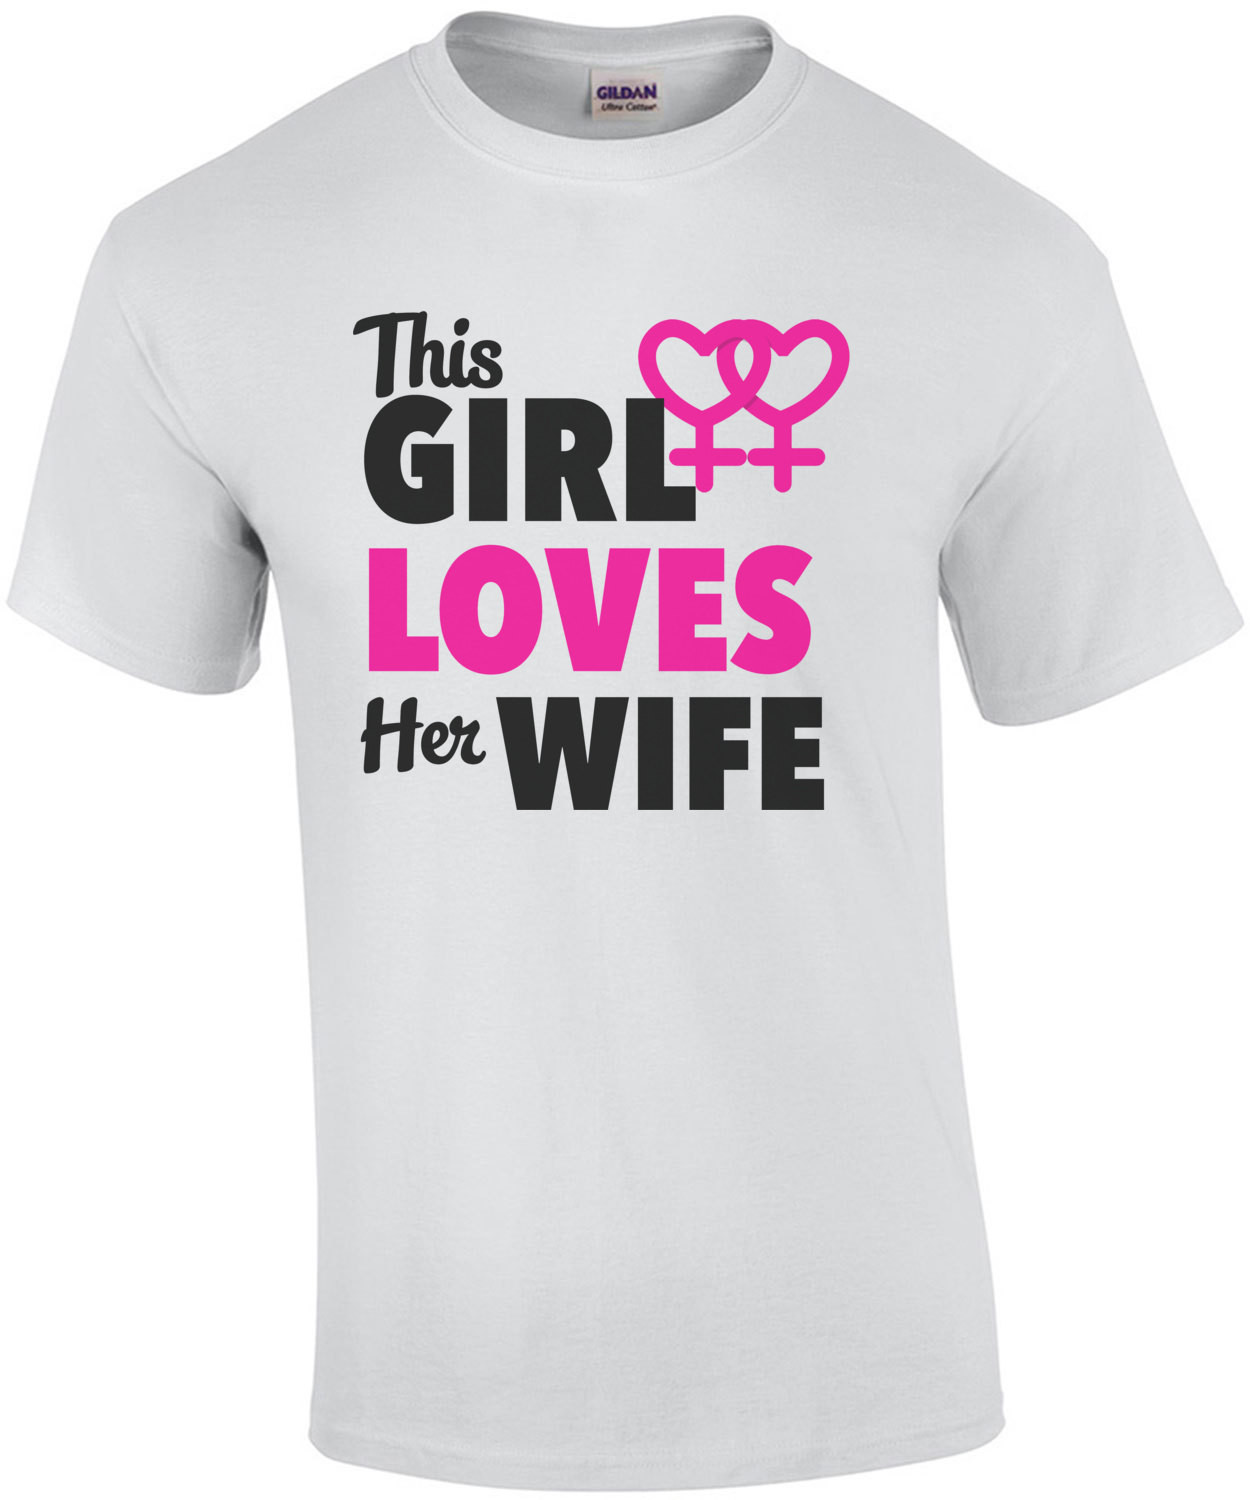 This girl loves her wife - lesbian t-shirt